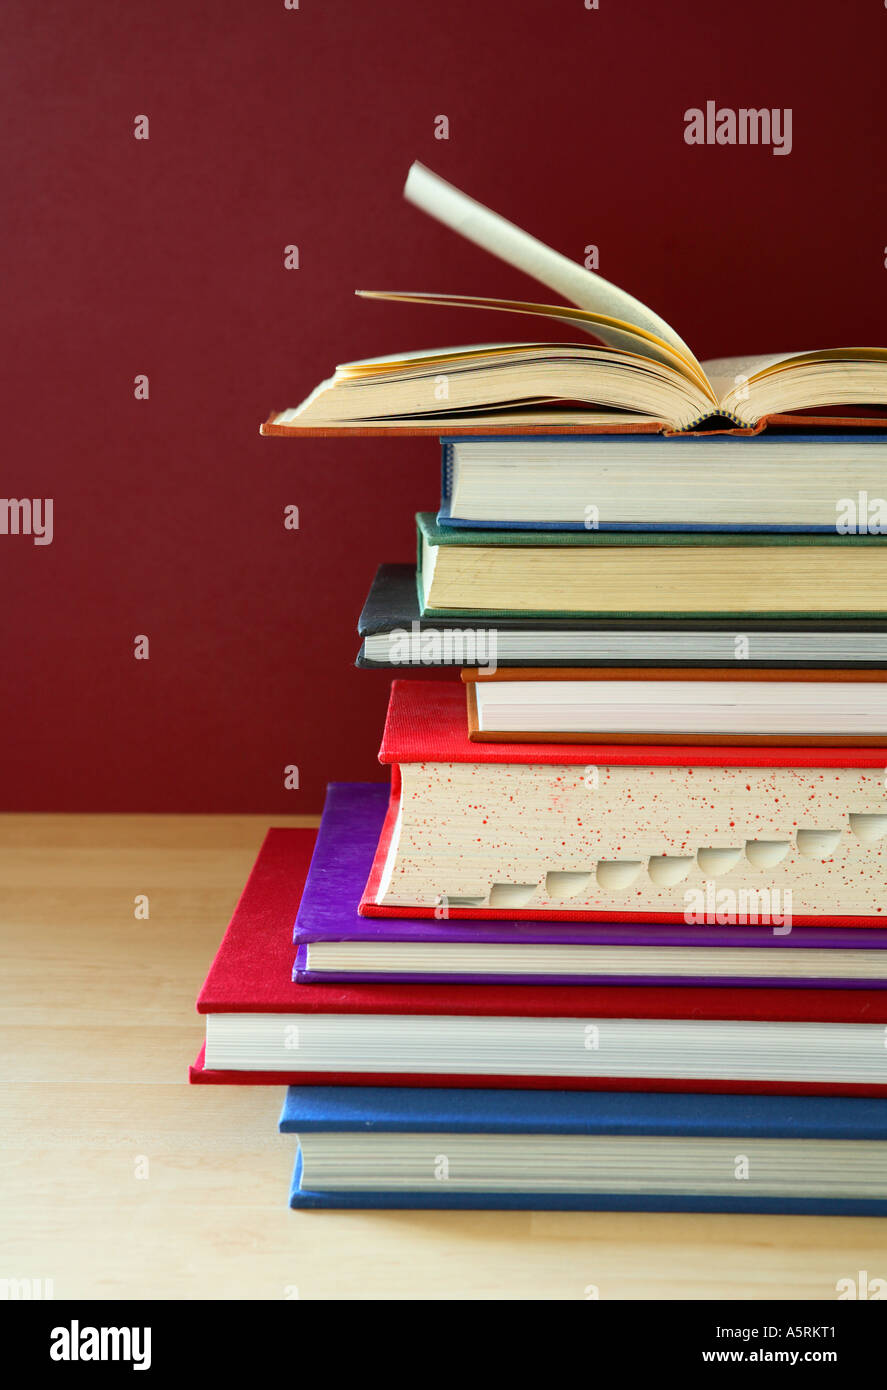 Stack of school books with top book open. Stock Photo